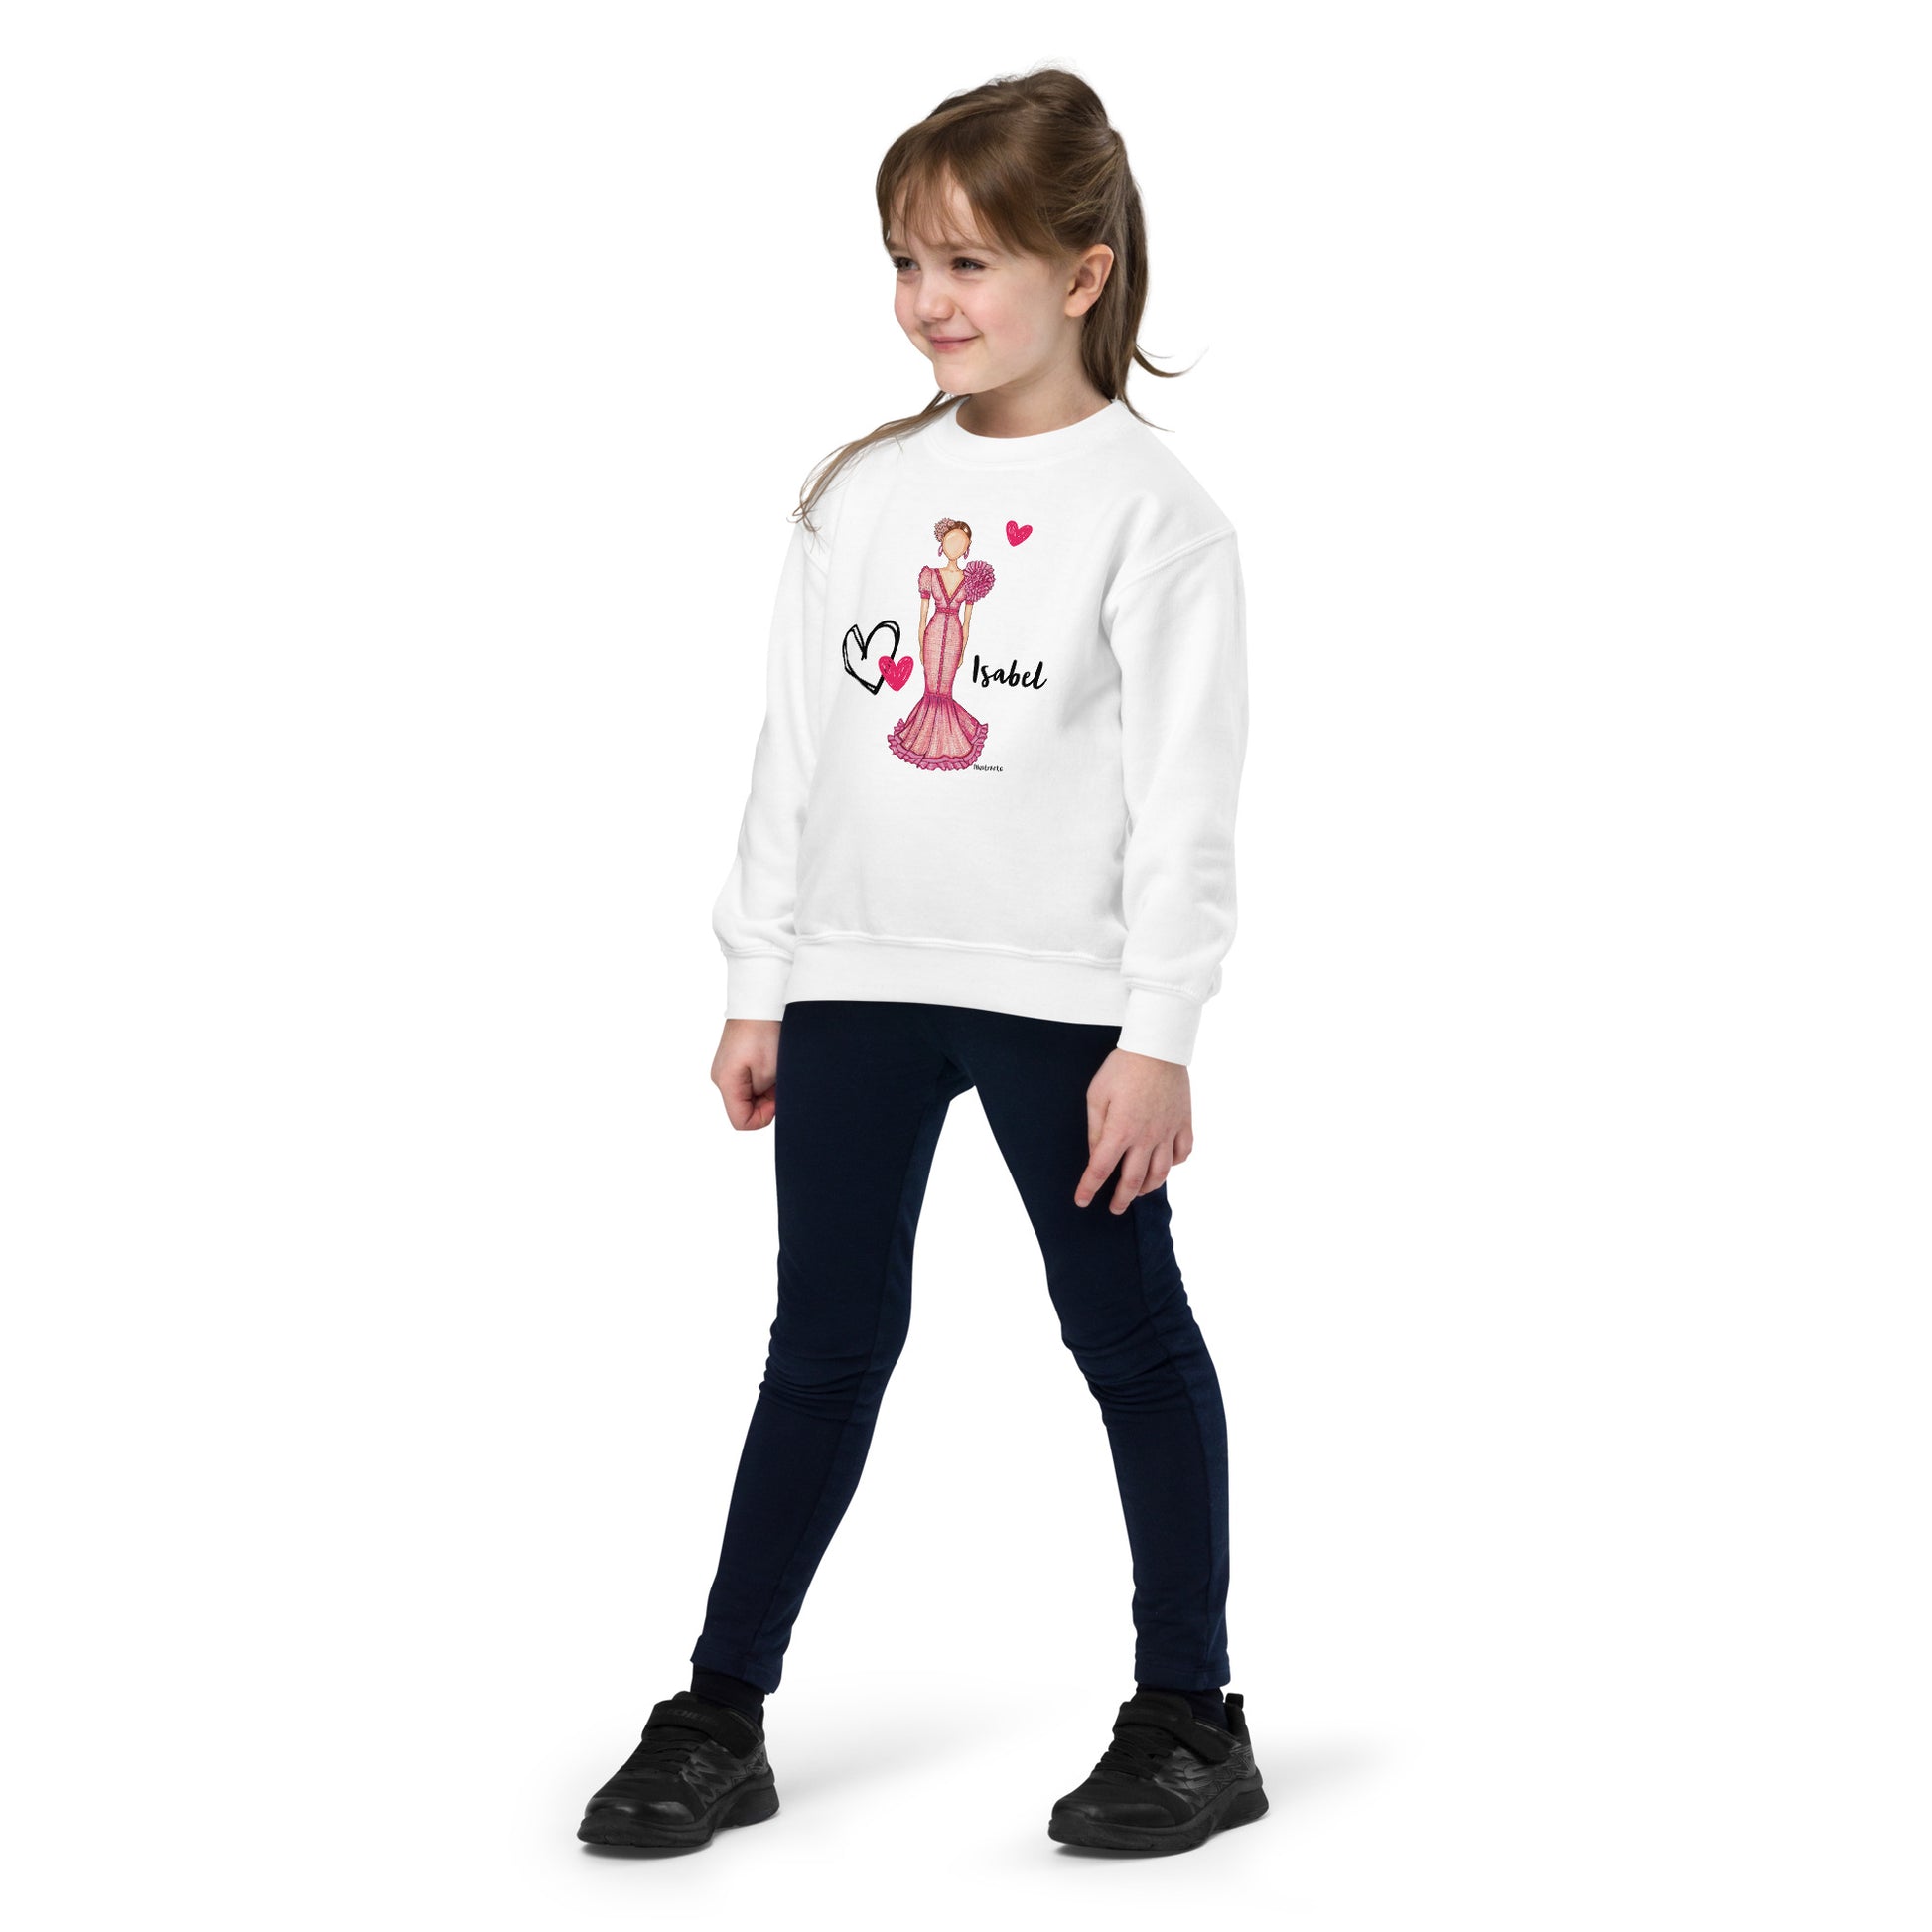 a little girl wearing a white sweatshirt and jeans